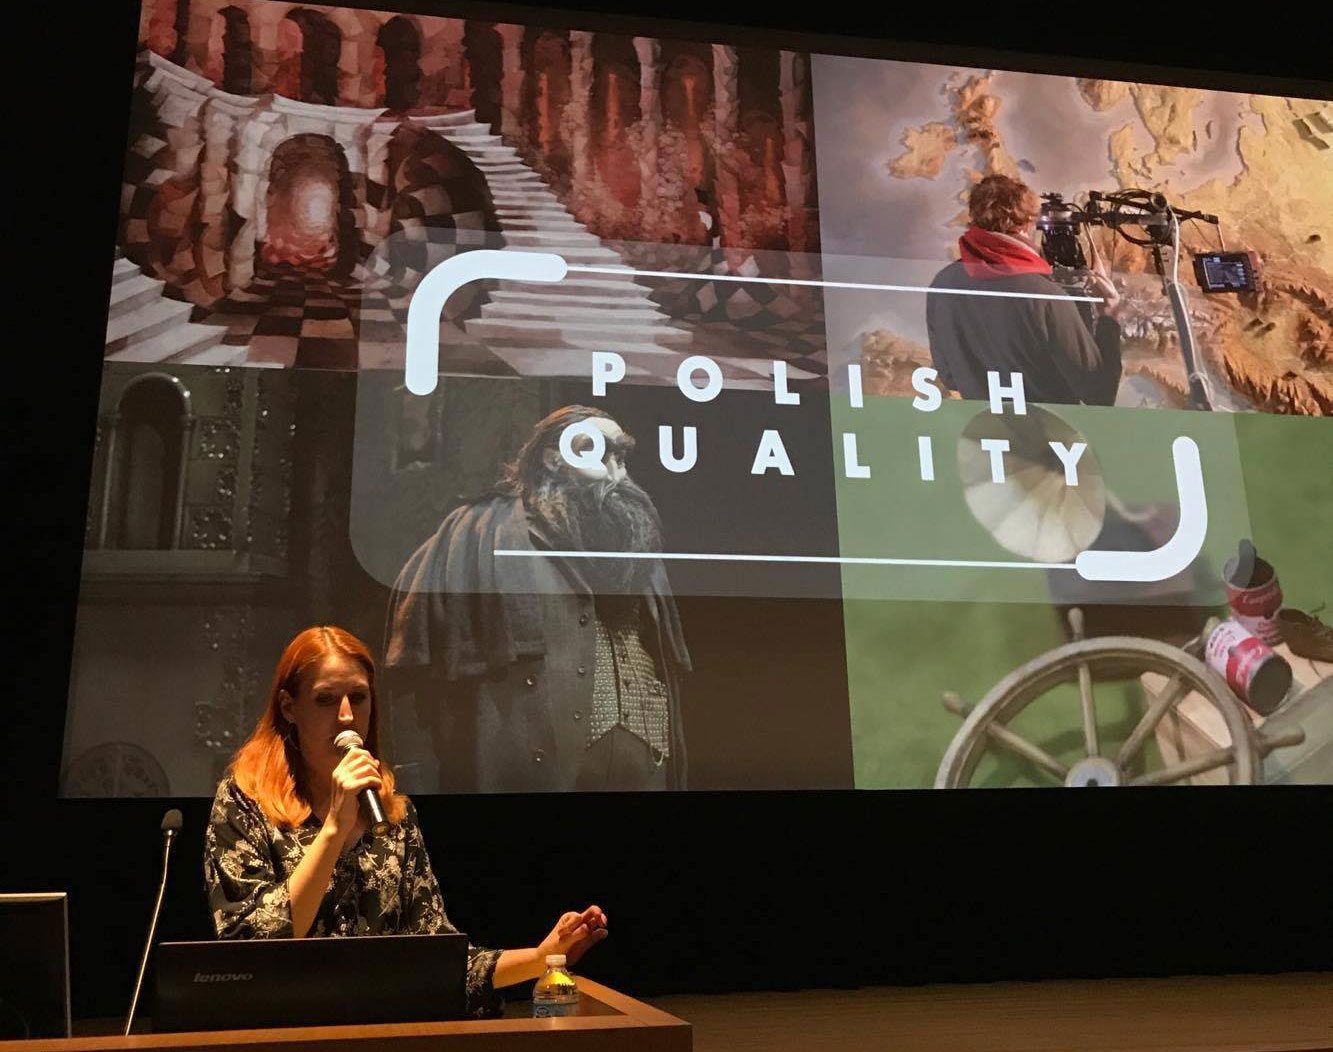 Momakin's Katarzyna Gromadzka presented Polish Quality projects during the recent Festival Stop Motion Montreal.